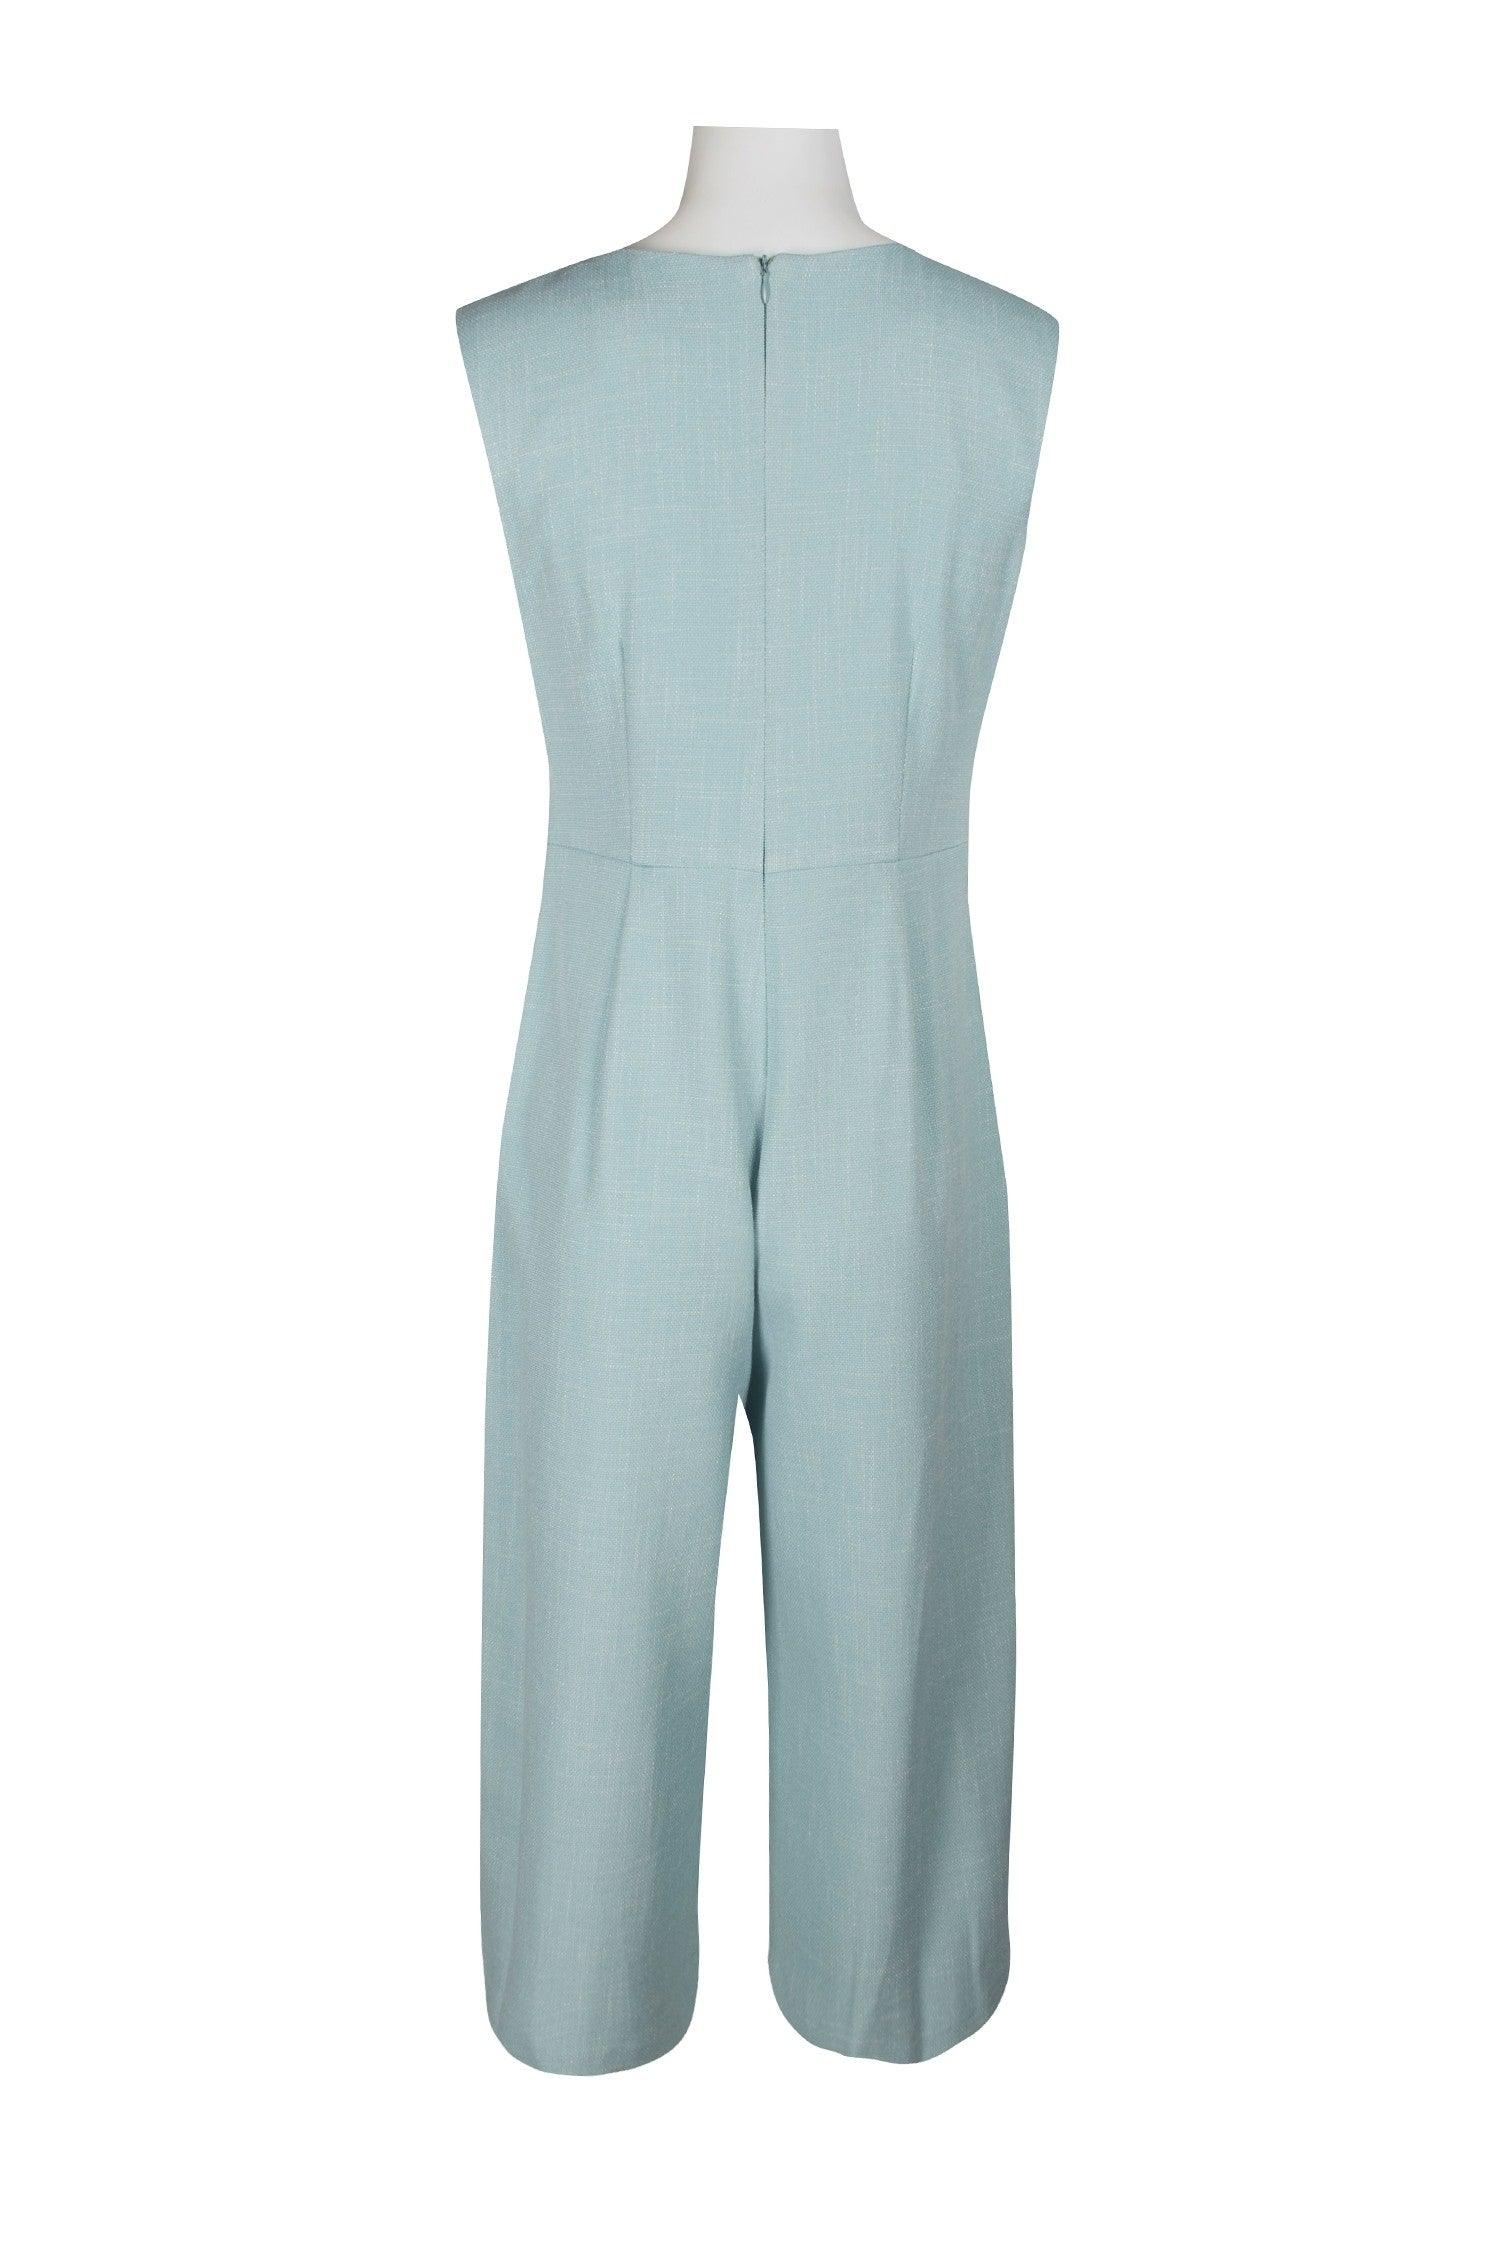 Connected Apparel Formal Sleeveless Jumpsuit - The Dress Outlet